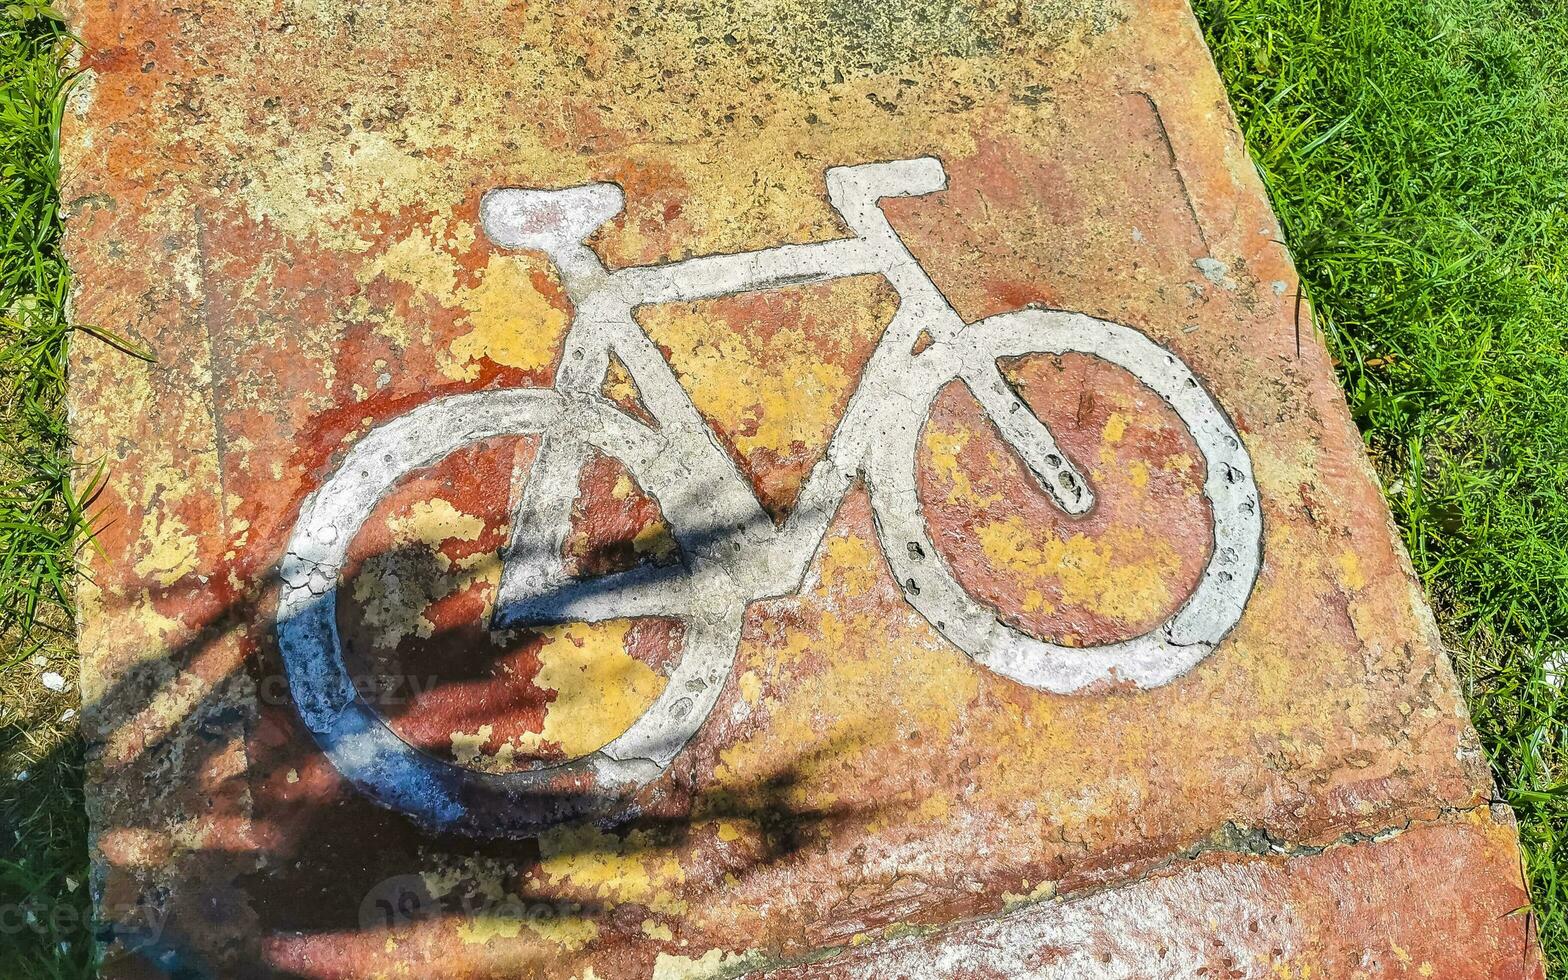 Bicycle symbol sign on ground of a bicycle lane Mexico. photo